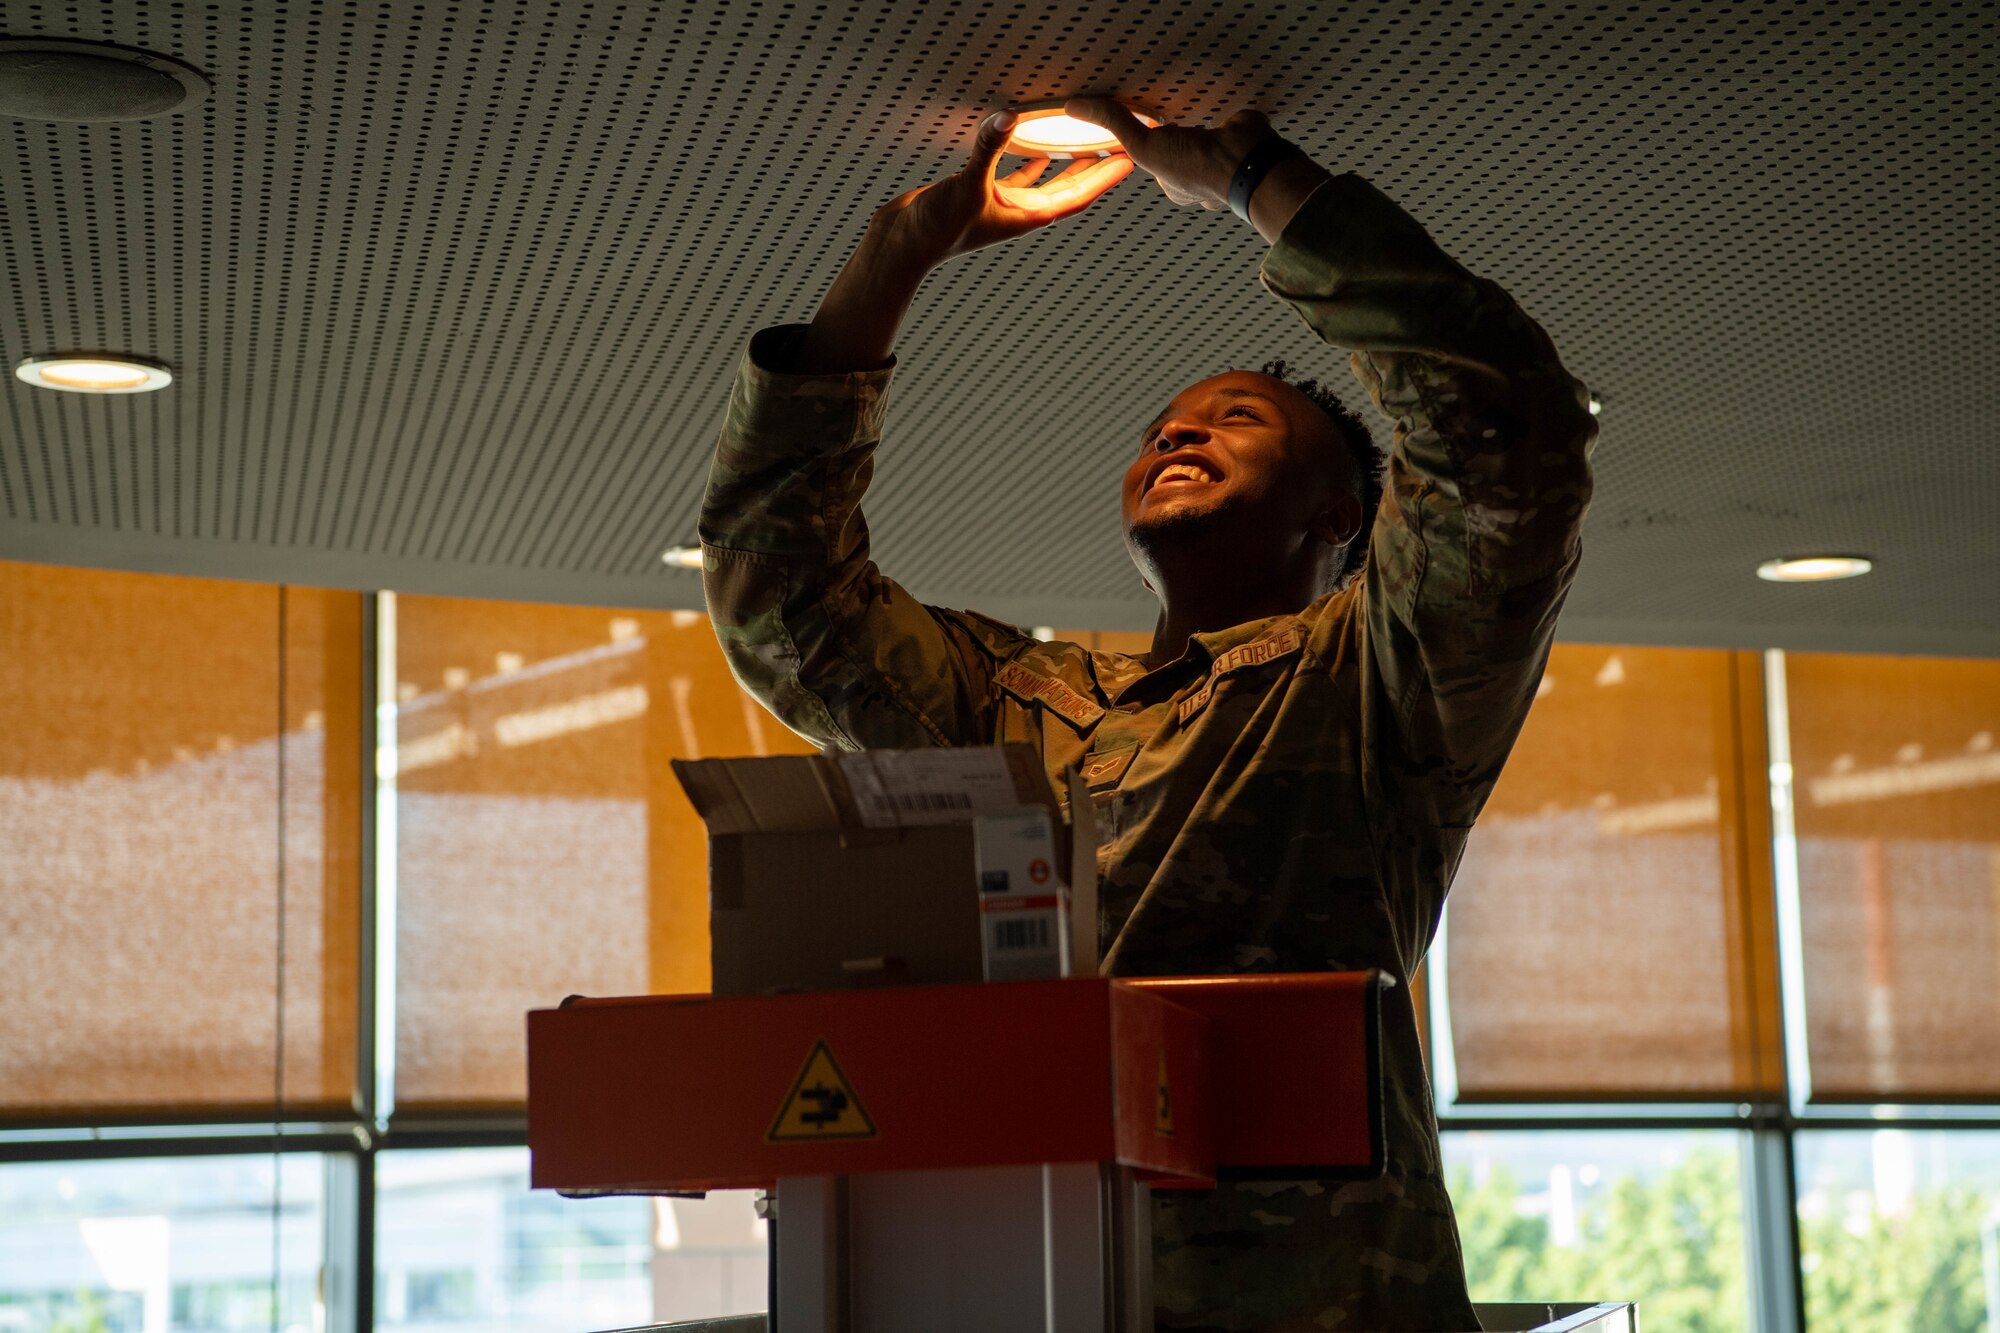 U.S. Air Force Senior Airman Tyreece Somma-Watkins, 786th Civil Engineering Squadron electrical systems technician, checks light fixtures at HEROES in the Kaiserslautern Military Community Center at Ramstein Air Base, Germany, Aug. 2, 2022.